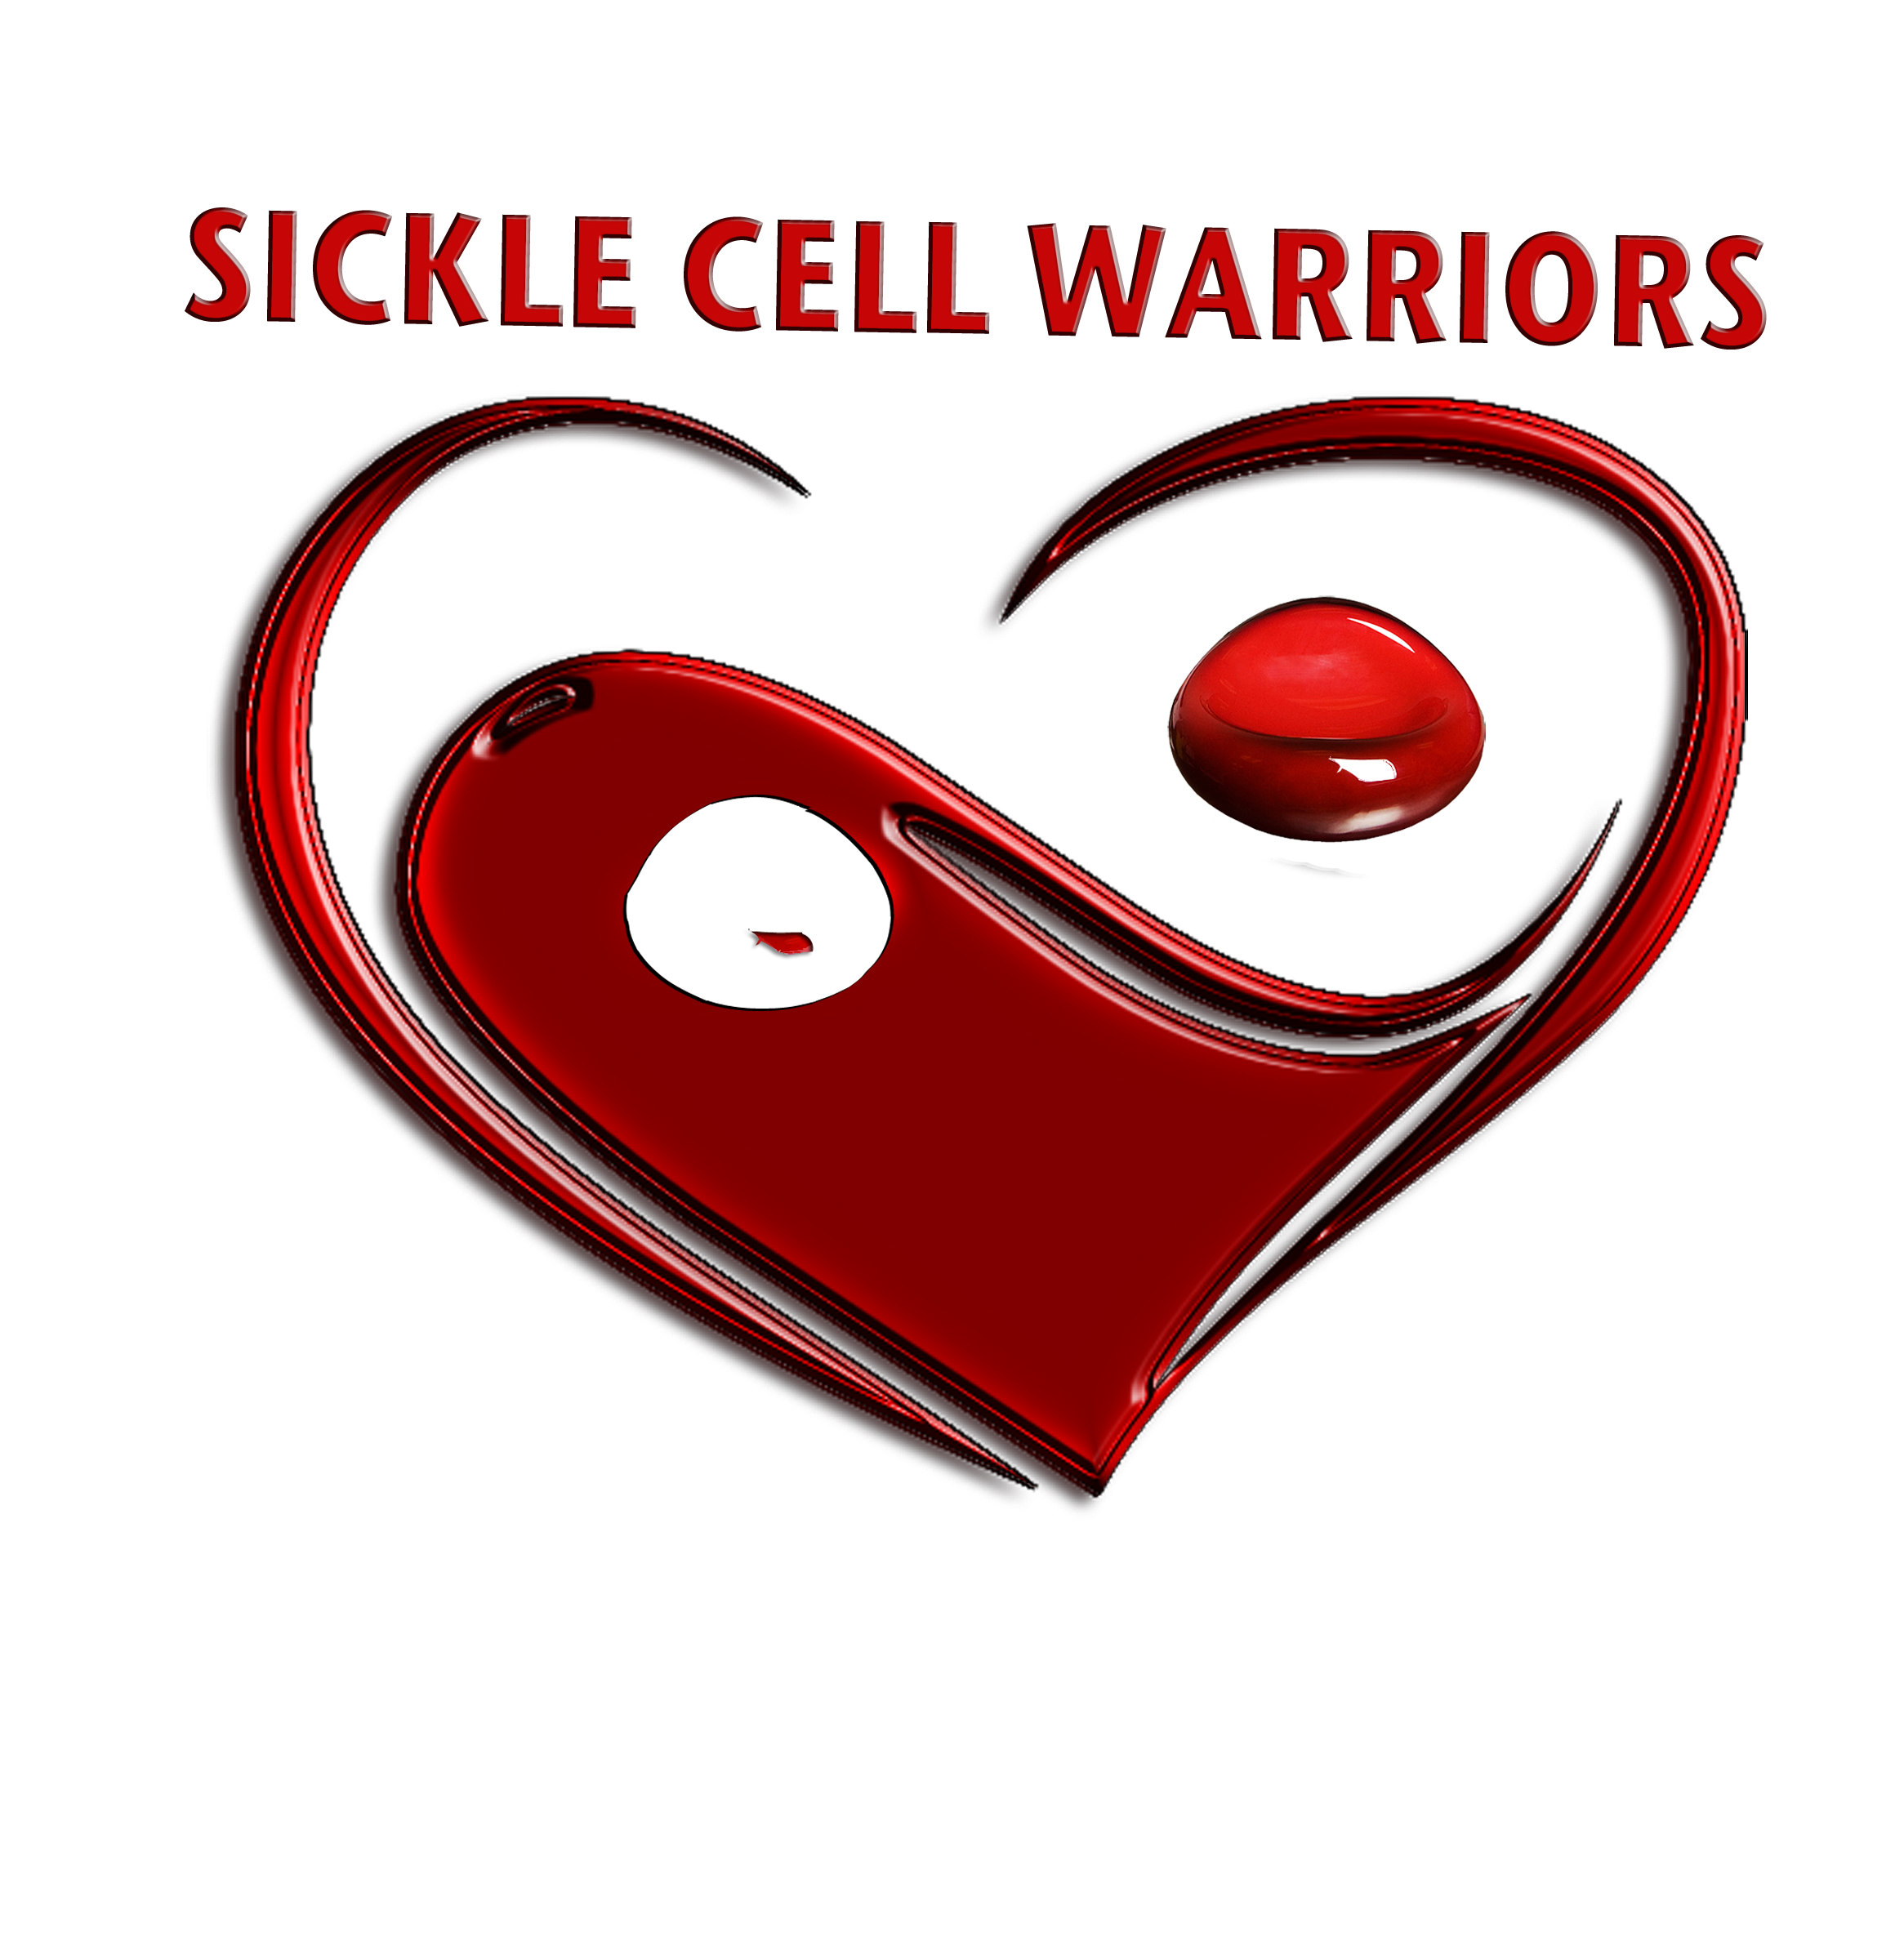 Sickle Cell Warriors